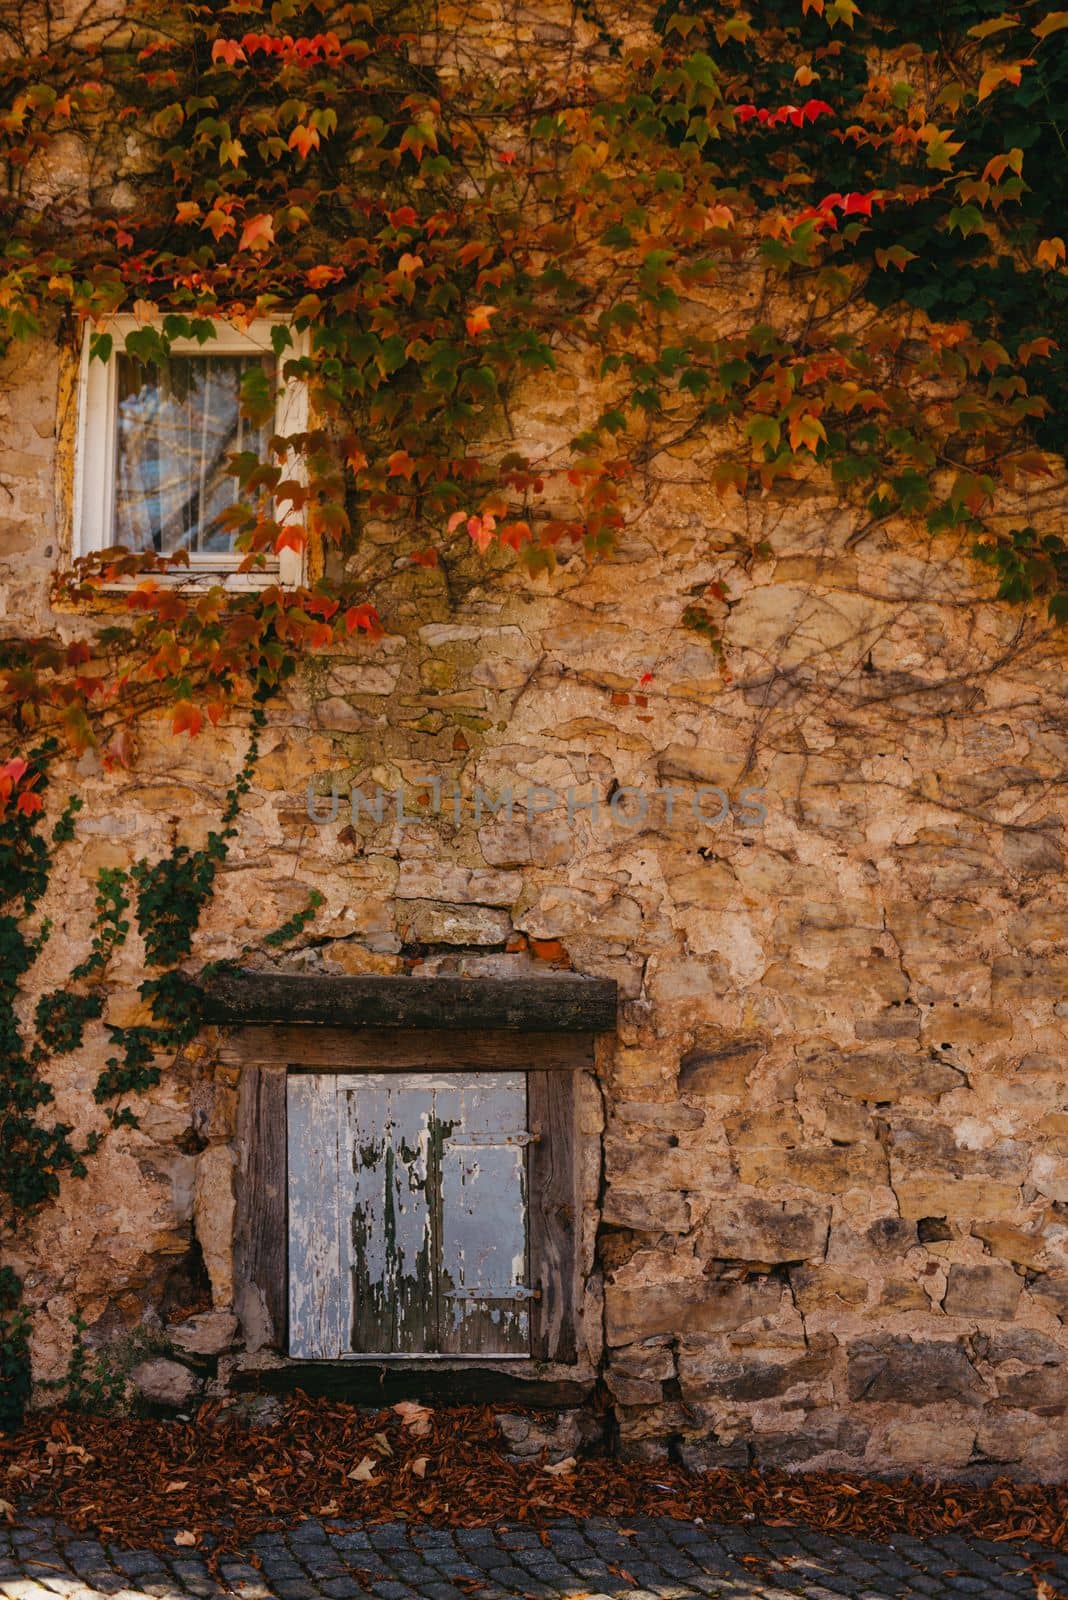 Old vintage rustic German shabby small house with colorful grapevine-covered wall. Autumn red leaves of Virginia creeper vine. Abstract Ancient overgrown house with blue wooden window and door.